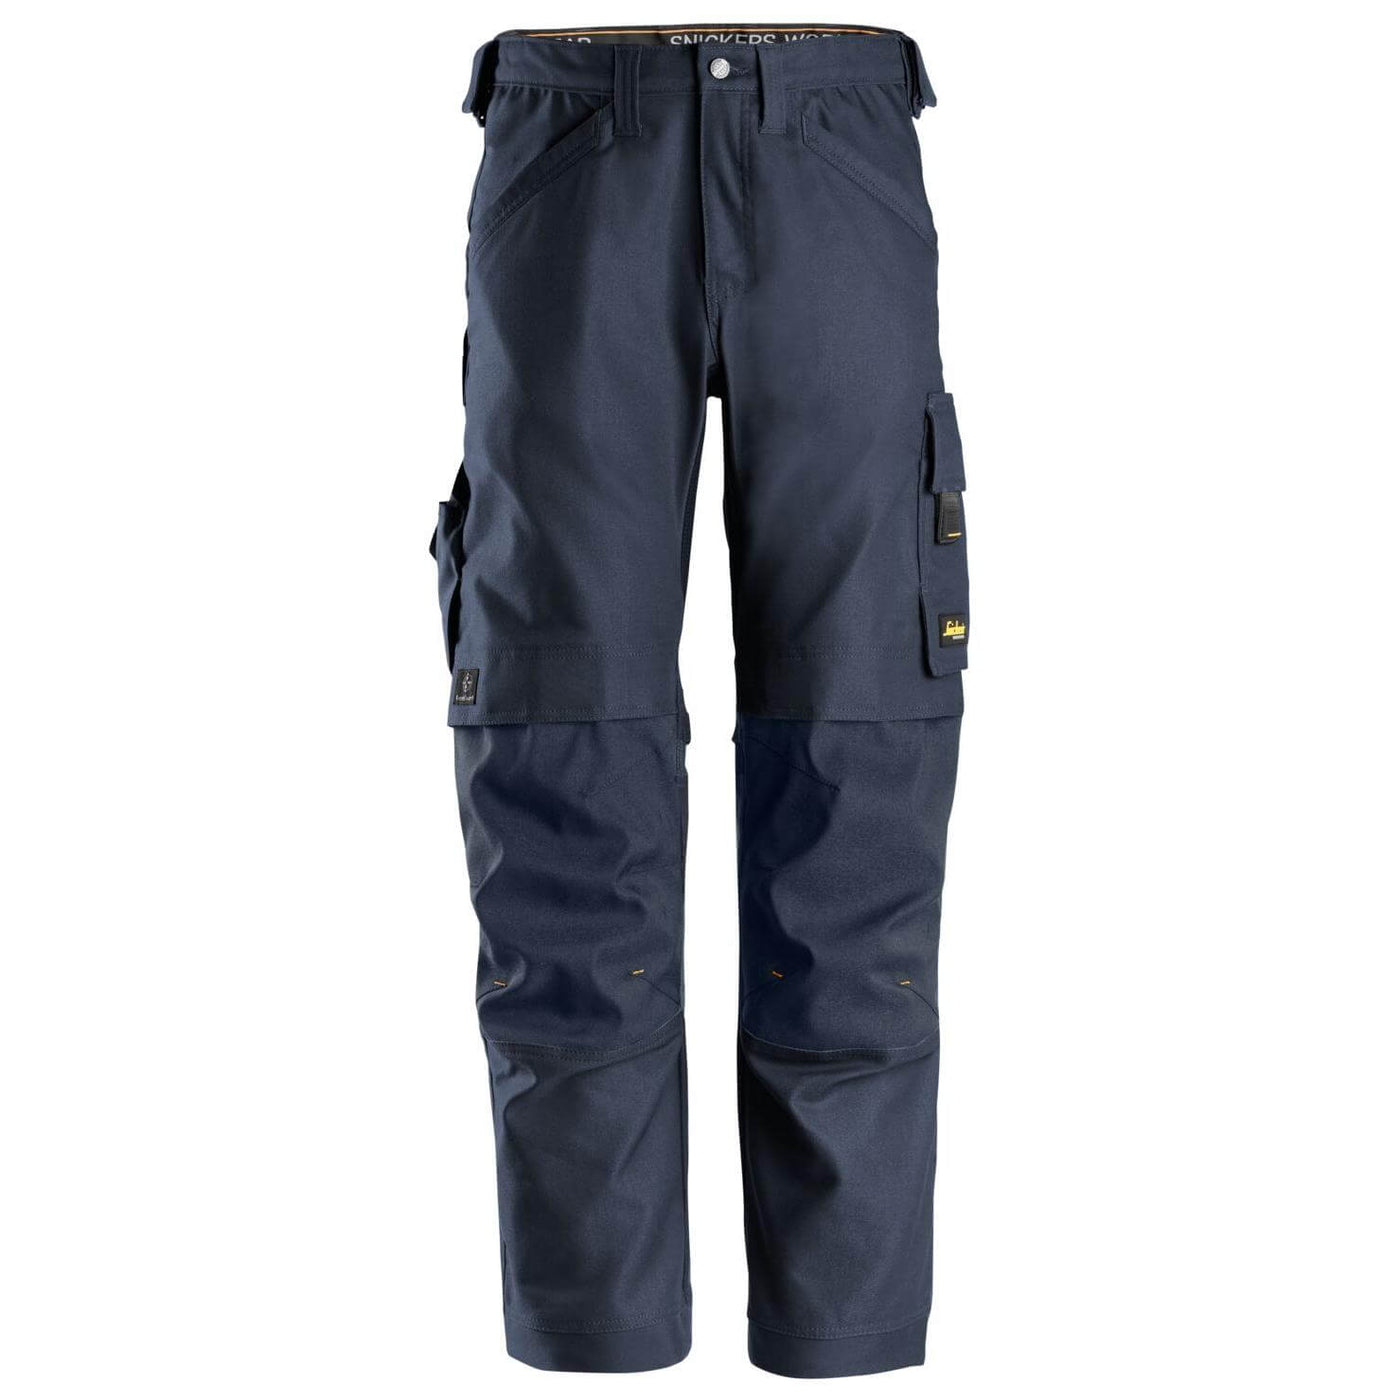 Snickers 6324 Allroundwork Canvas Stretch Work Trousers Navy